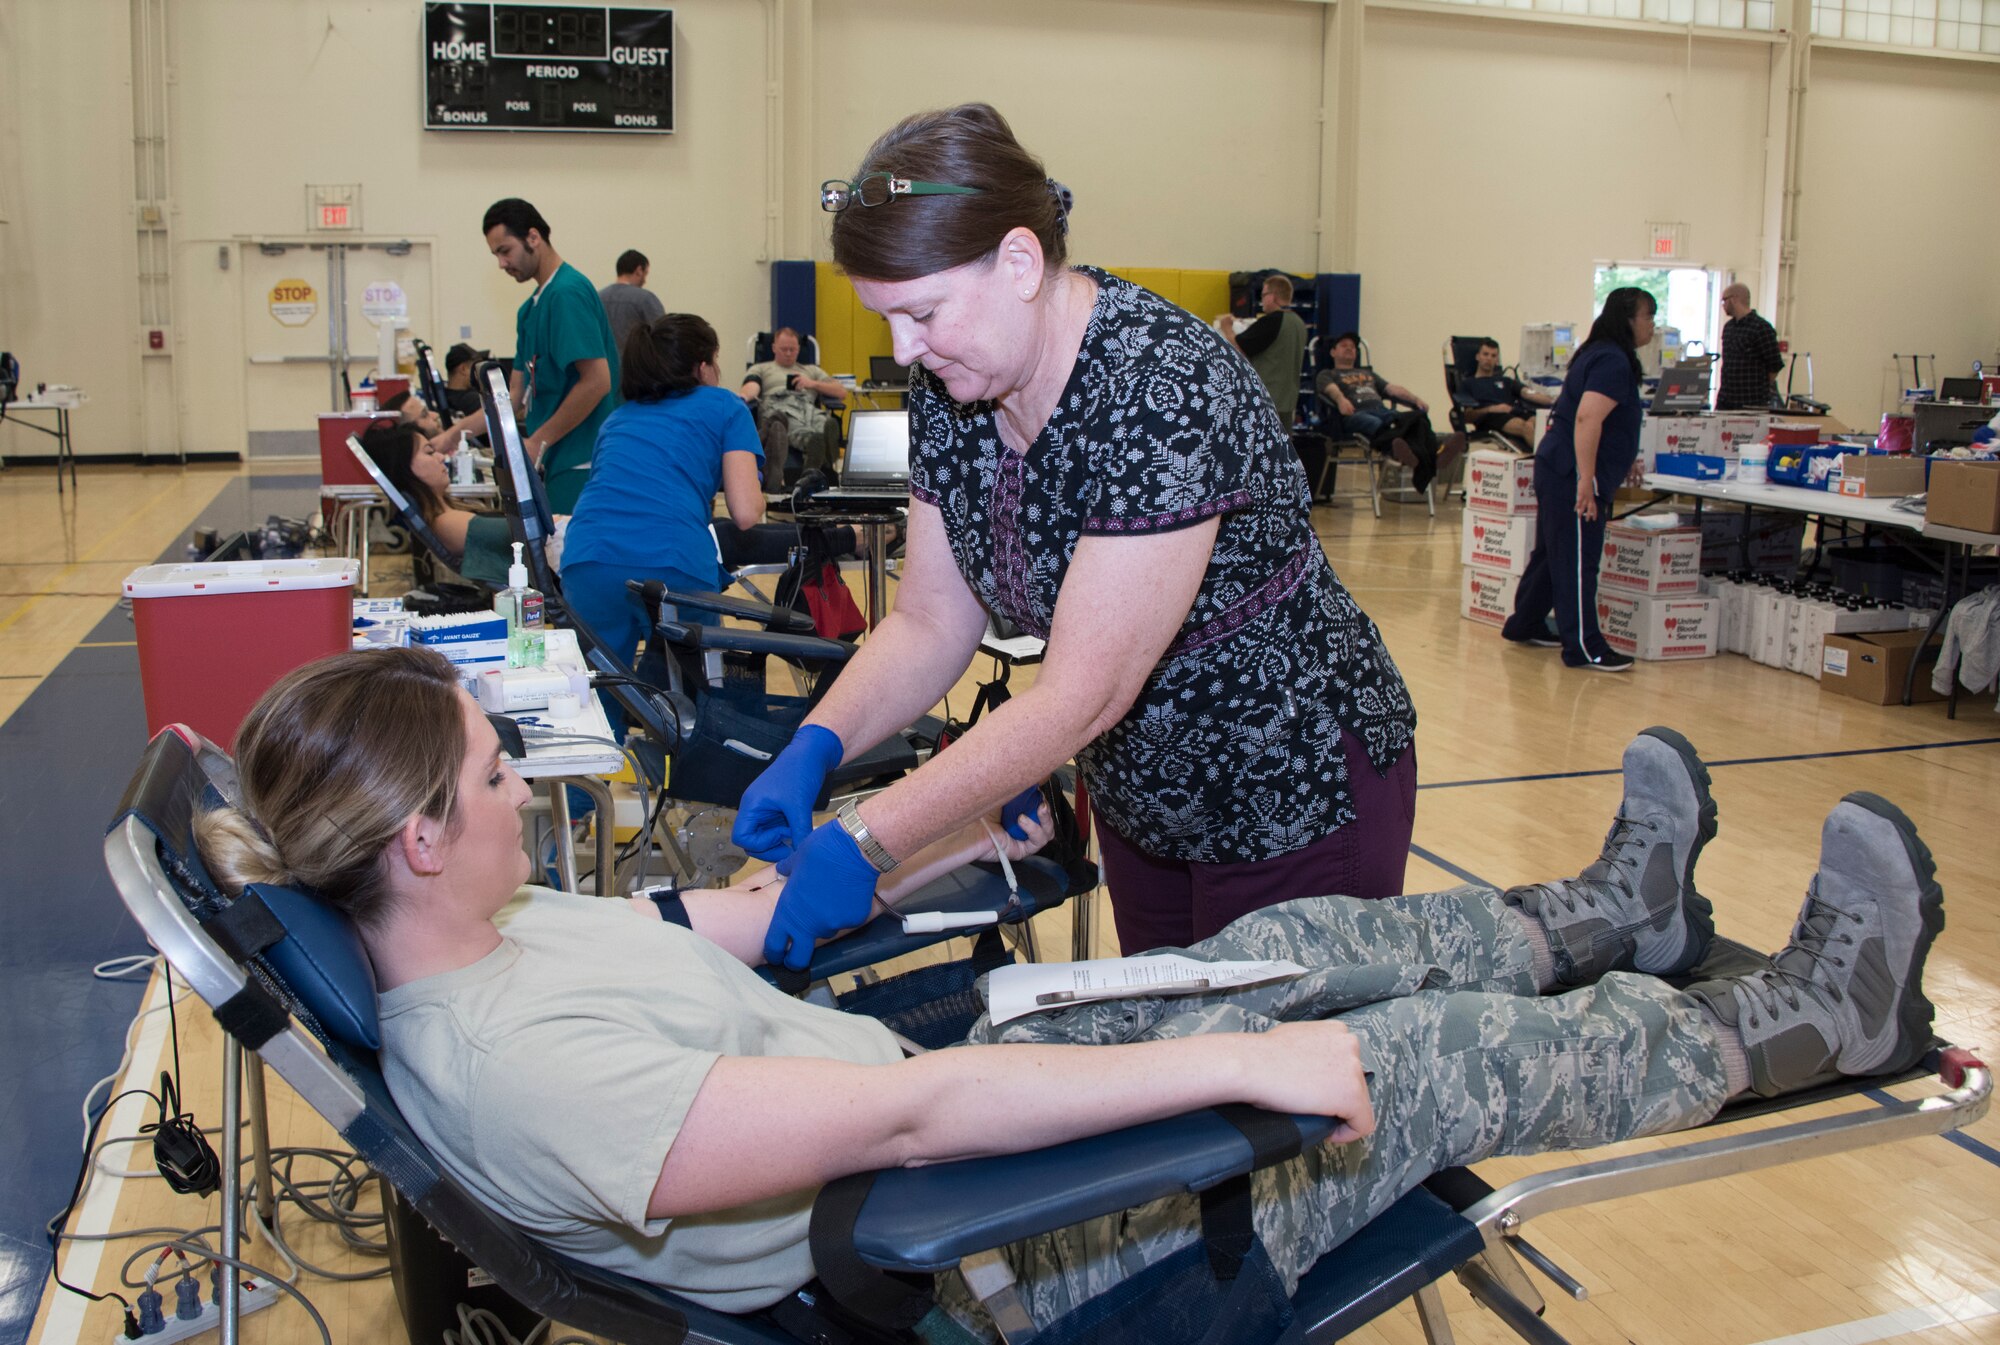 Airman 1st Class Brooke Bohrer, 60th Medical Support Squadron, donates blood, April 27, 2018, Travis Air Force Base, Calif. Since 2012, Travis AFB has supported 4,815 patients. Just one pint of donated blood can help save as many as three people's lives. (U.S. Air Force Photo by Heide Couch)